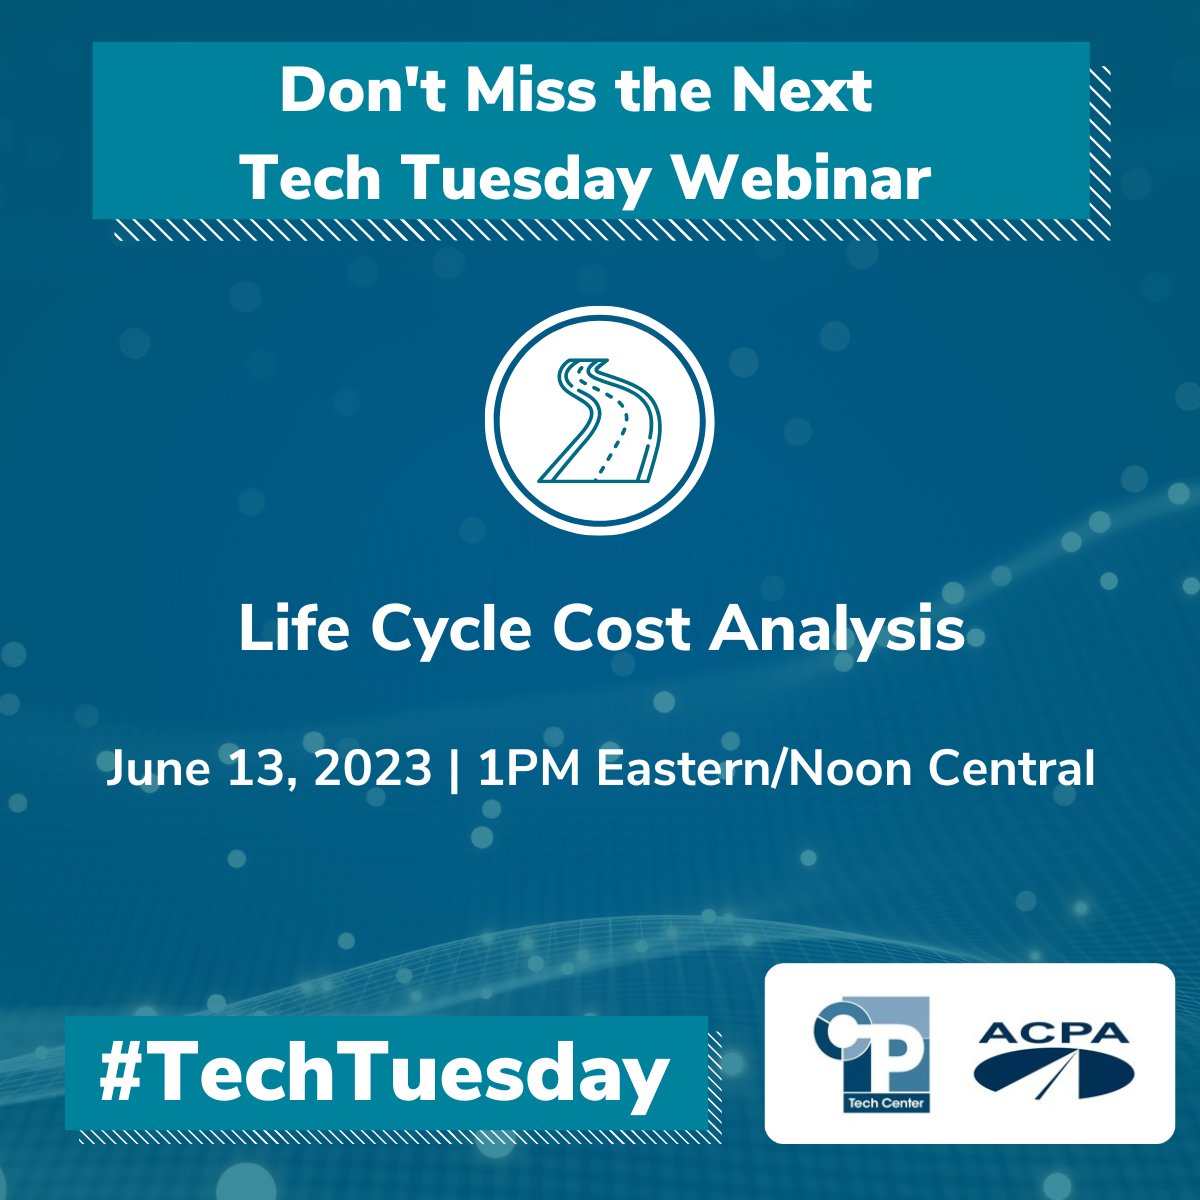 Don't miss tomorrow's Tech Tuesday webinar, presented by the CP Tech Center and ACPA. Presenters Jim Mack (CEMEX) and Tim Martin (ACPA) will introduce Life Cycle Cost Analysis and provide an in-depth look at the best practices. attendee.gotowebinar.com/register/72889… #TechTuesday #Webinar